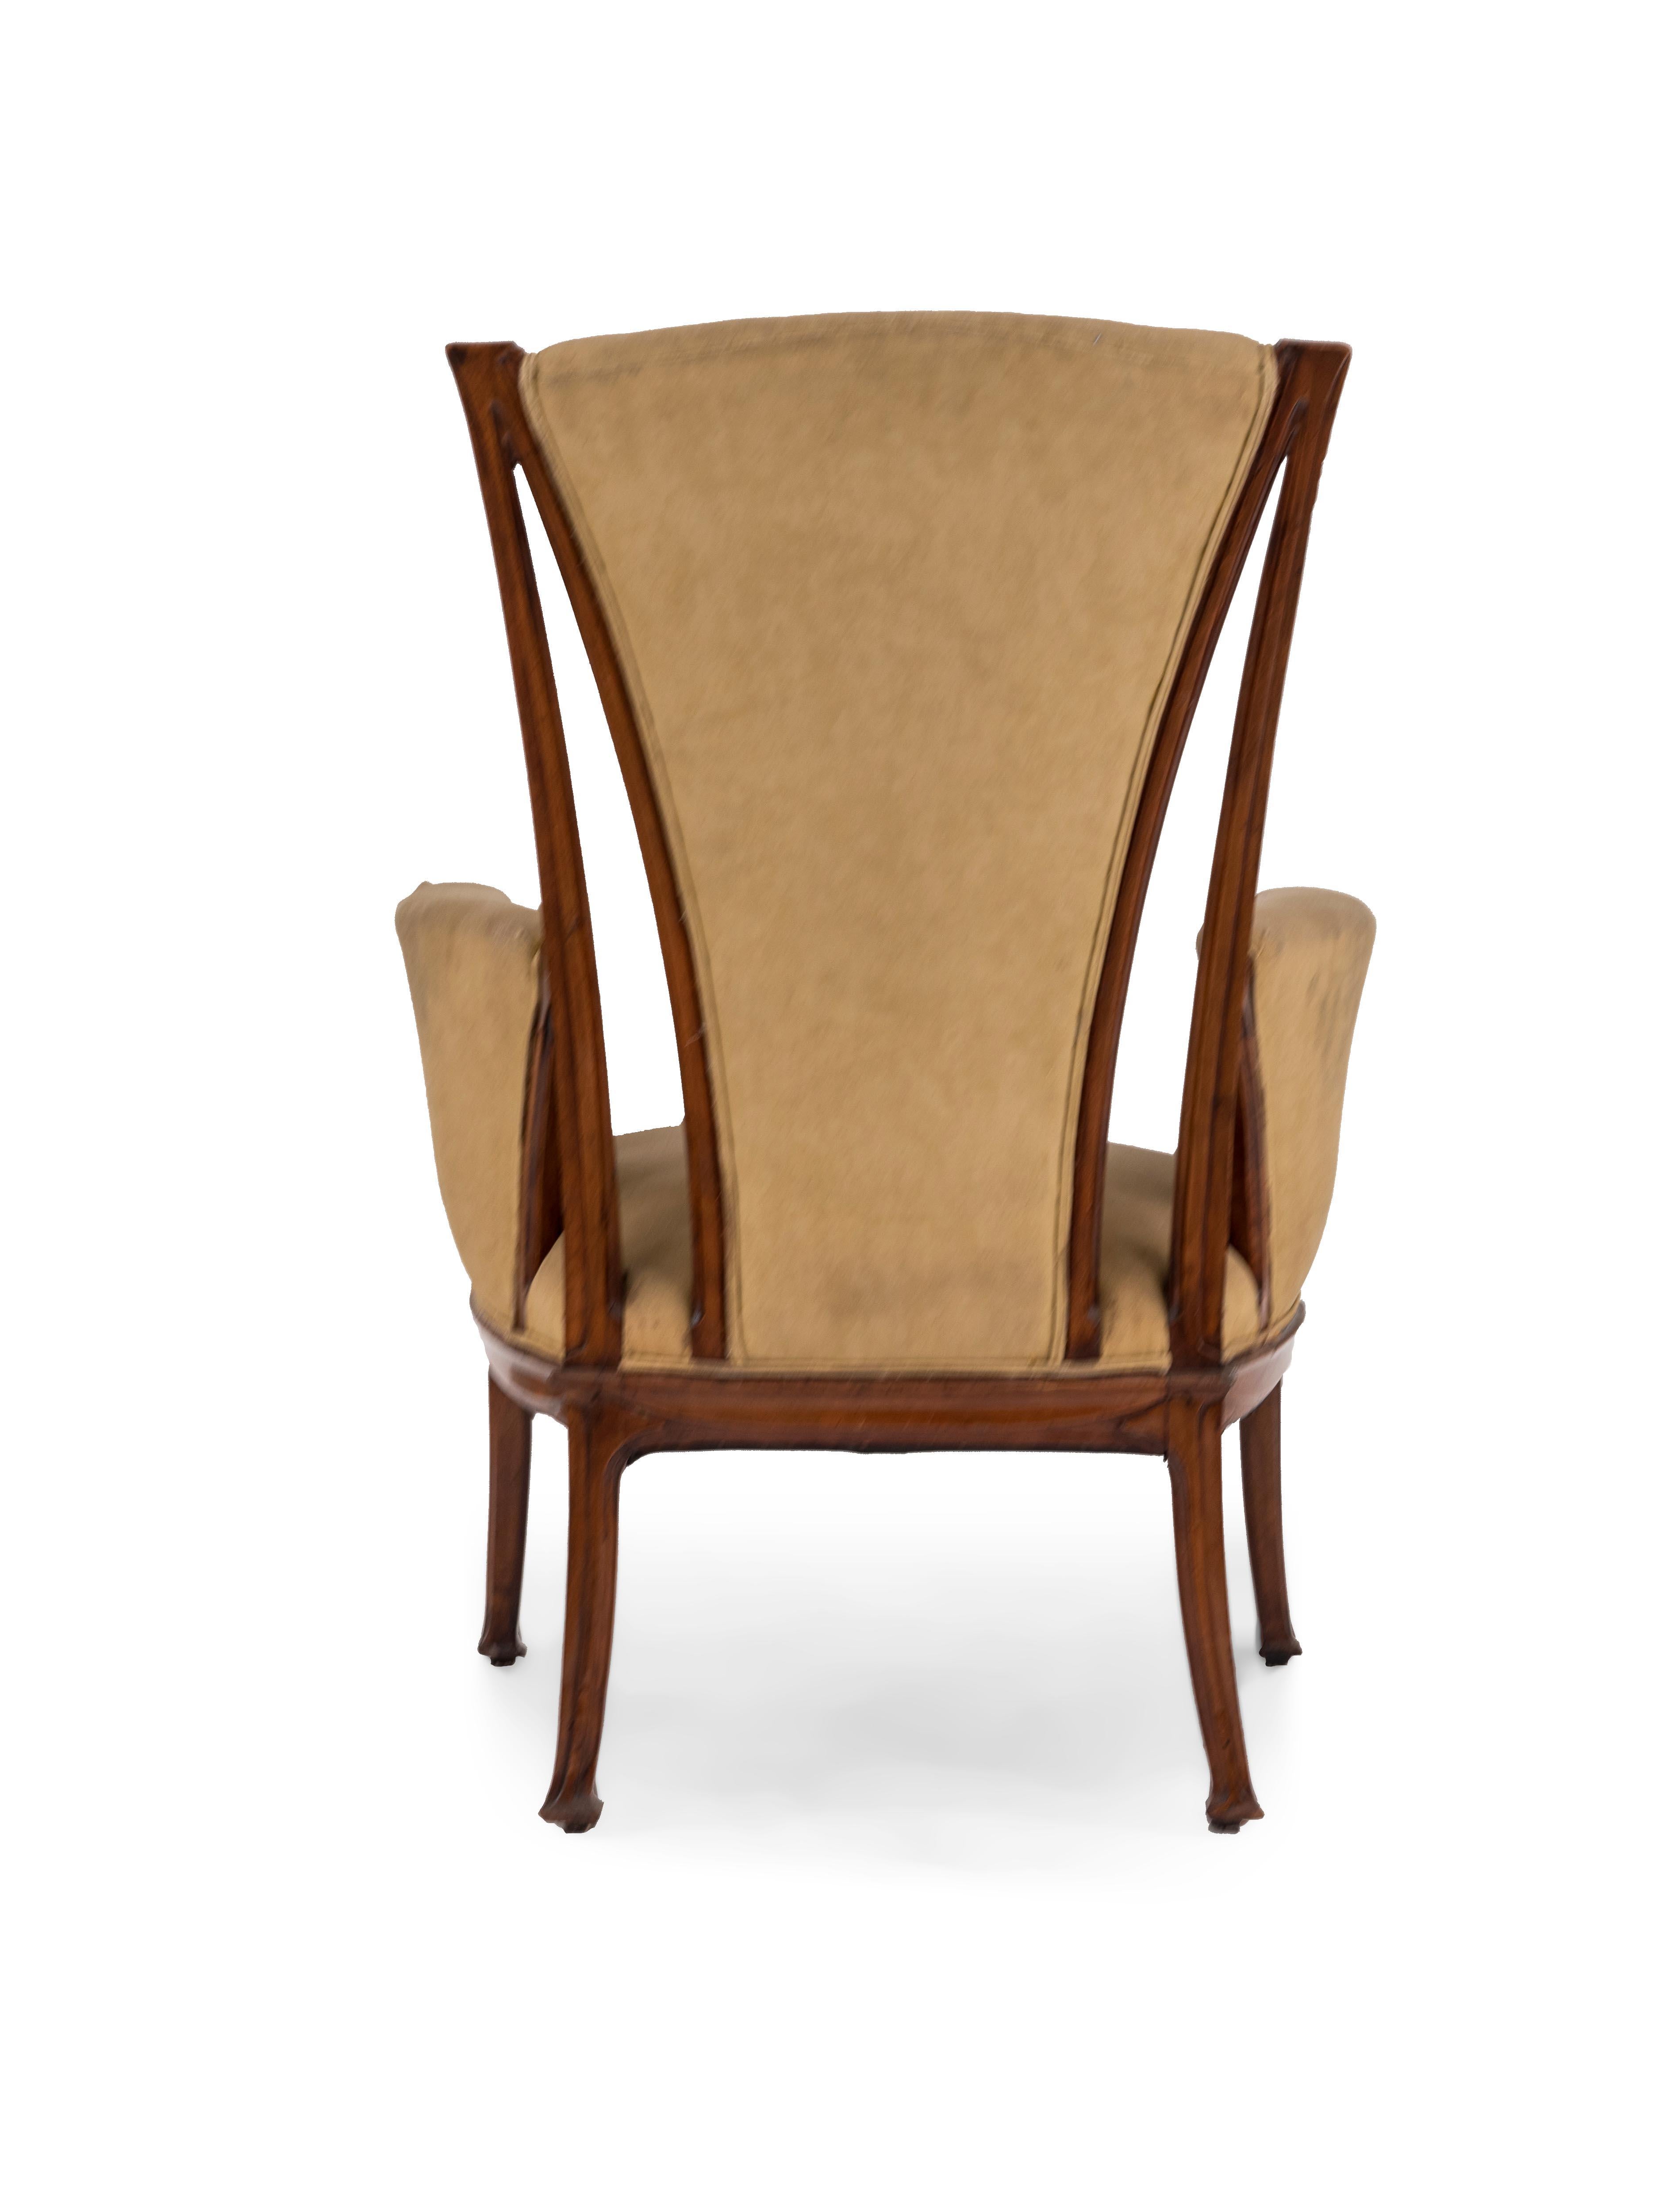 19th Century French Art Nouveau Berg√©re Arm Chair For Sale